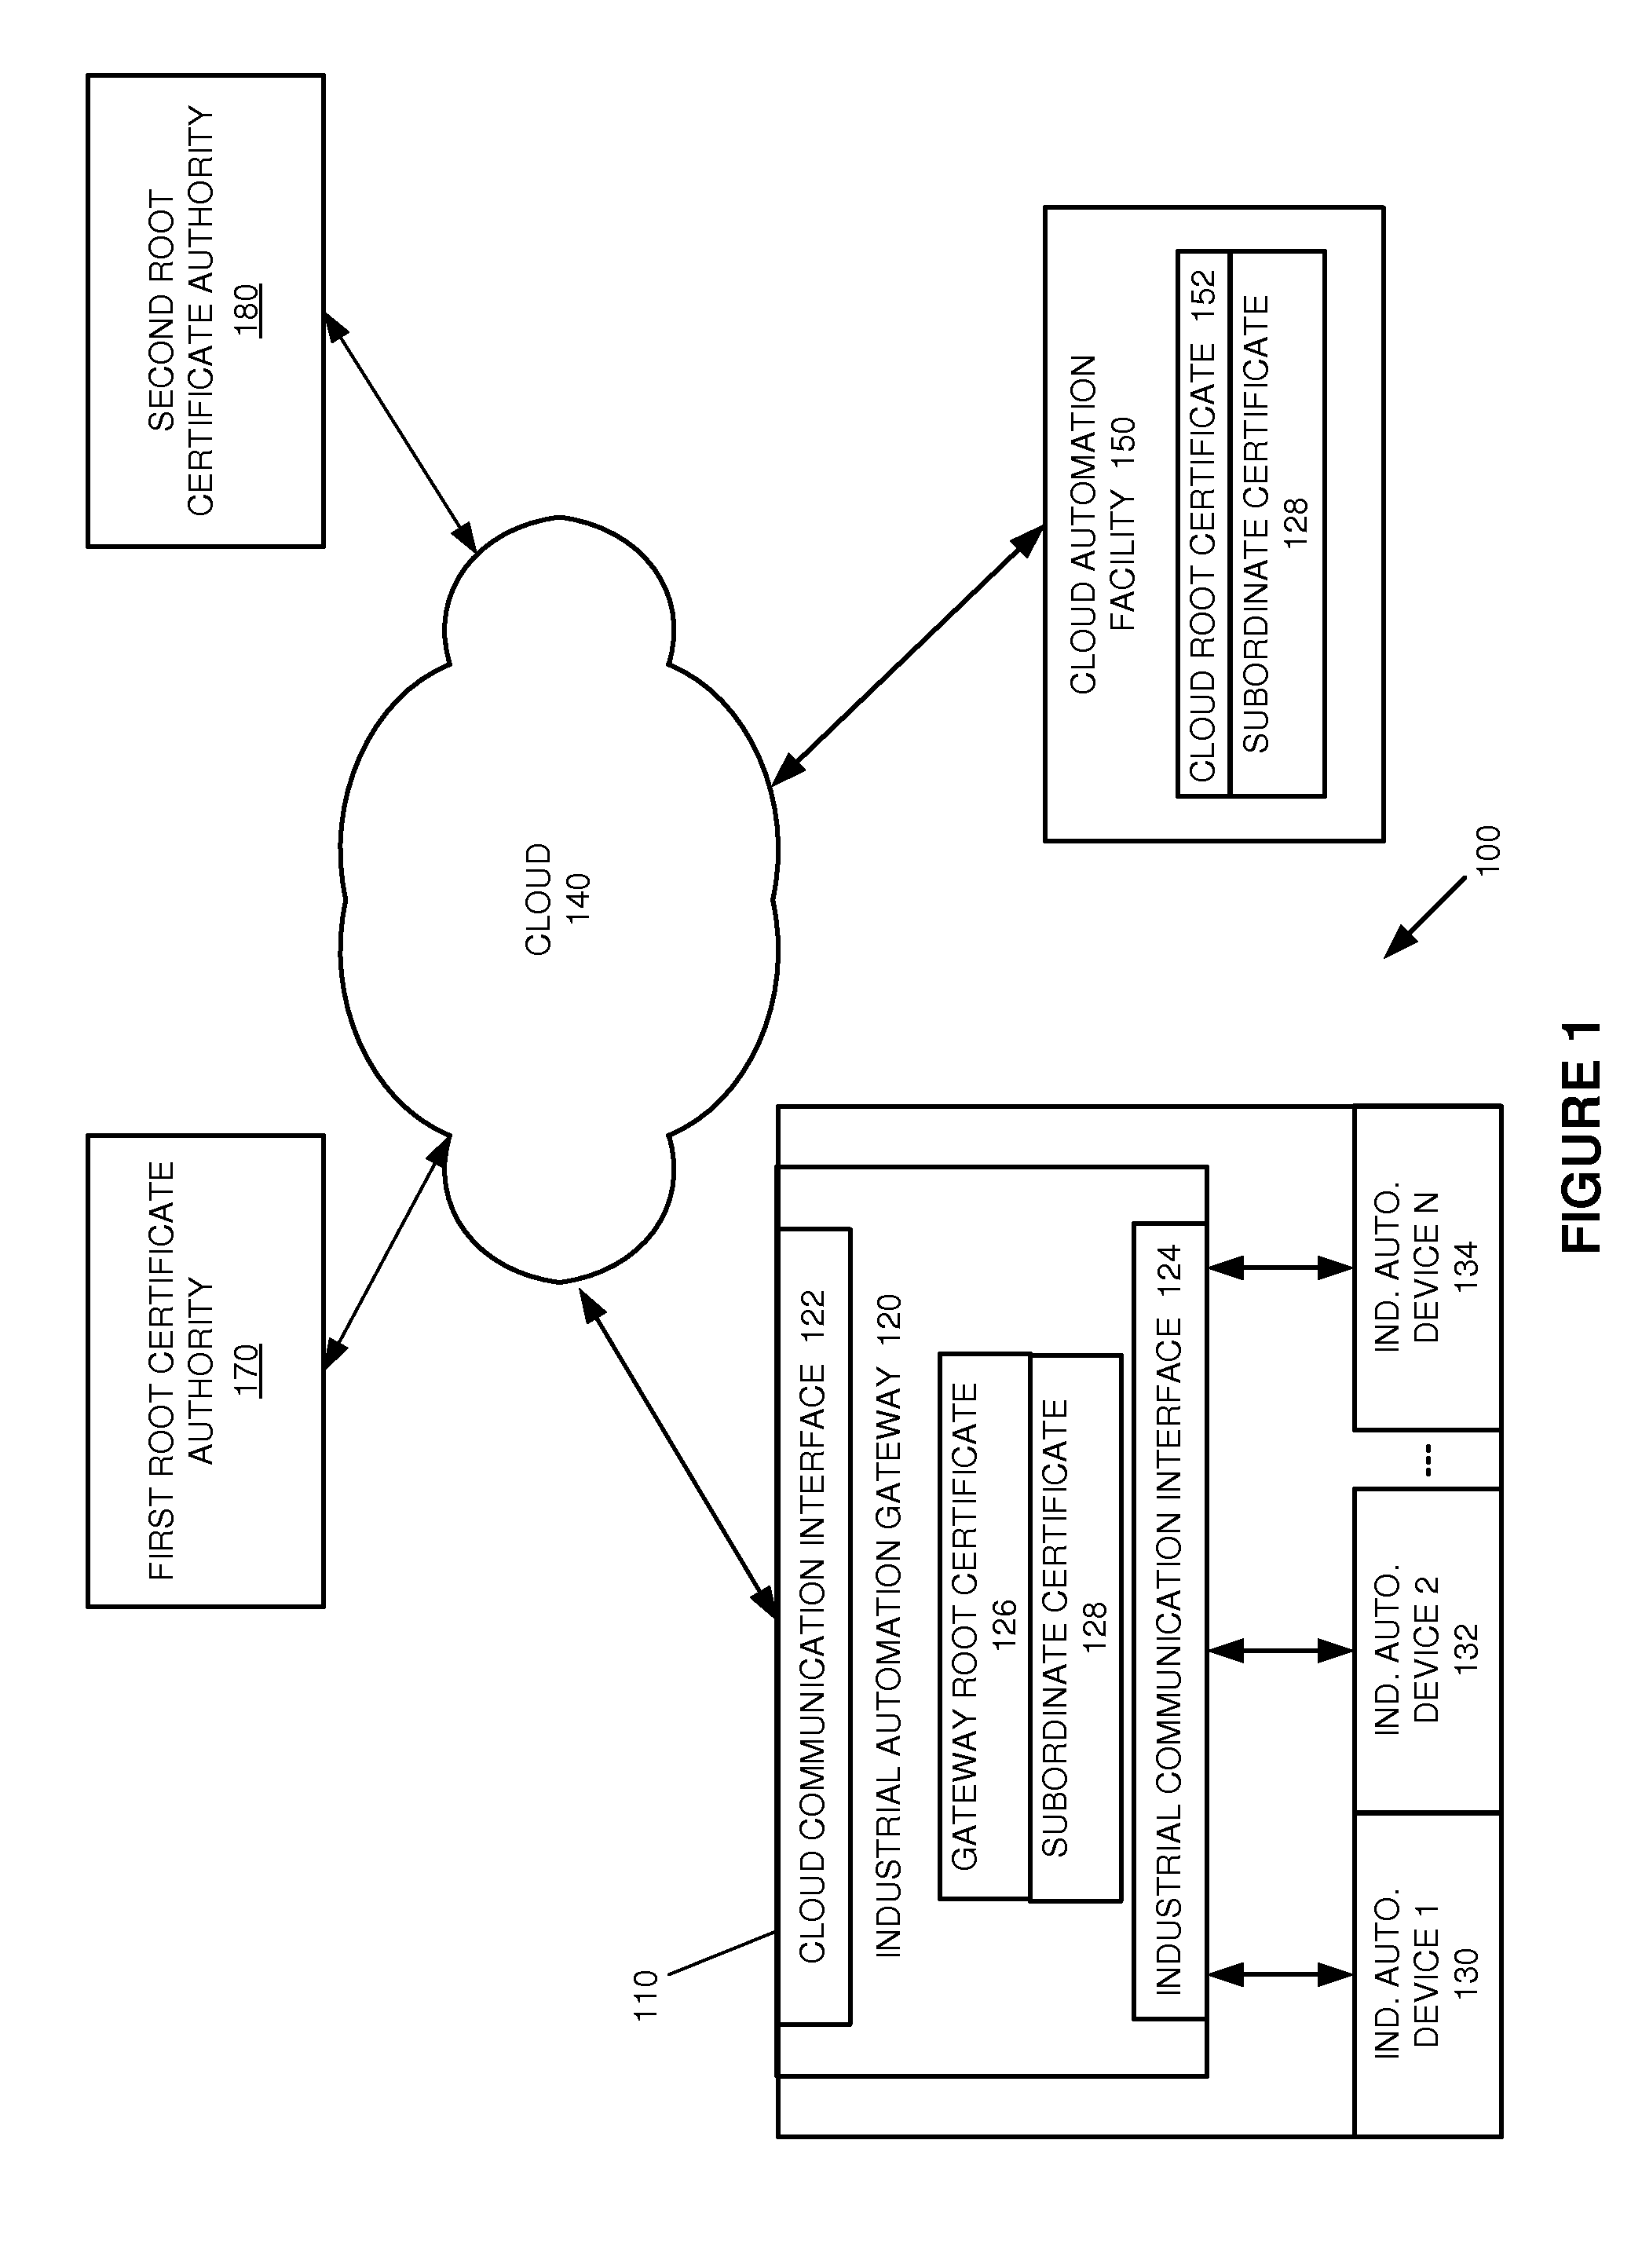 System and method for an extended web of trust